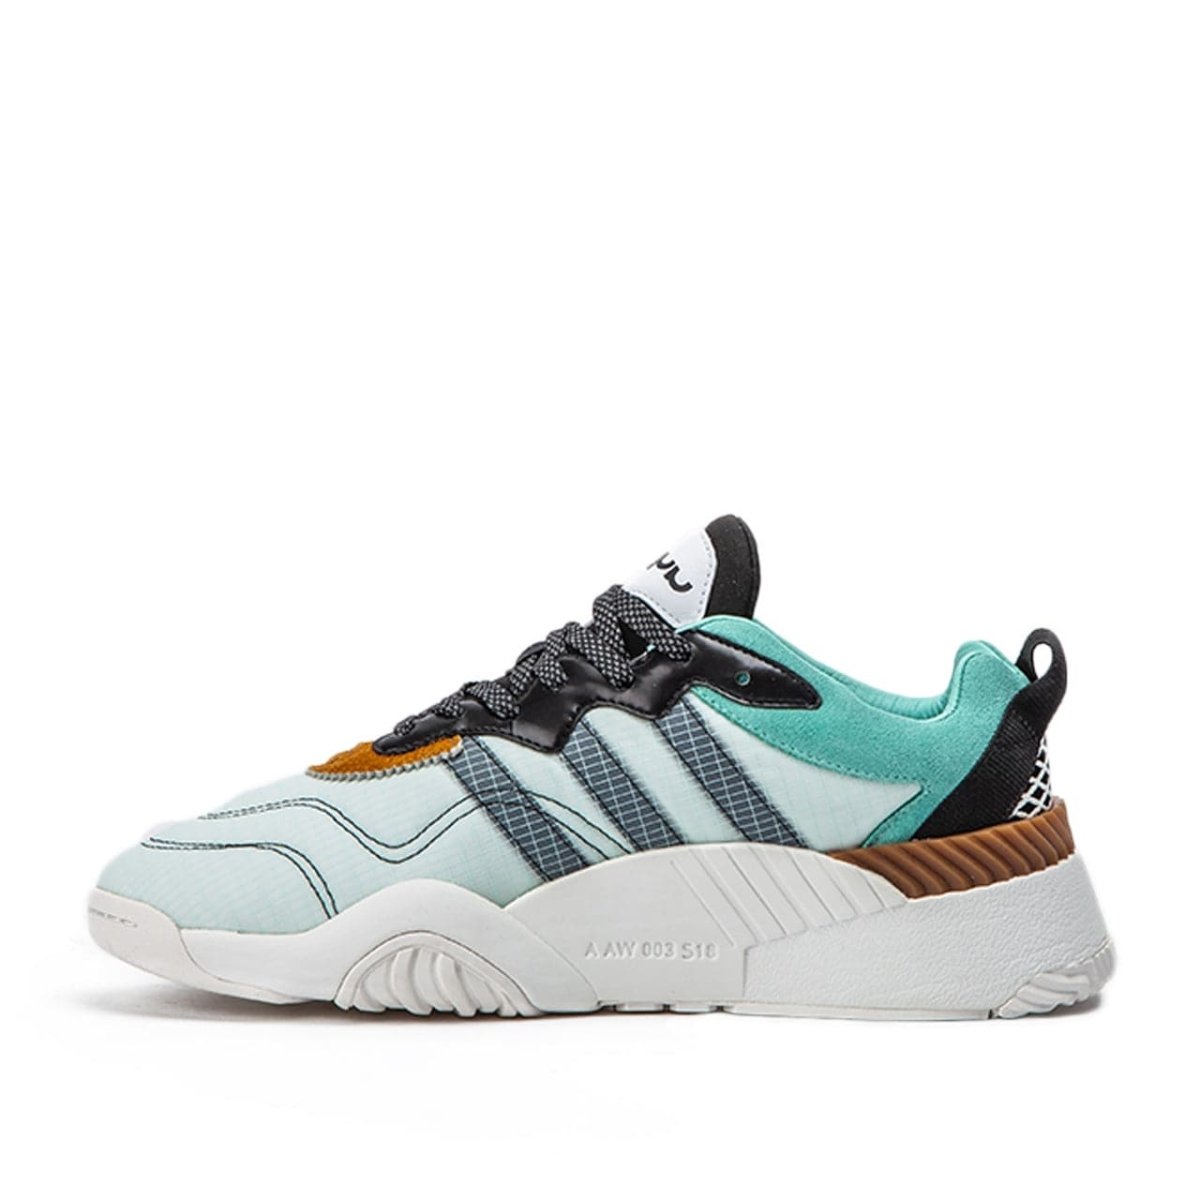 adidas by Alexander AW Turnout Trainer (Mint / Black) DB2613 – Allike